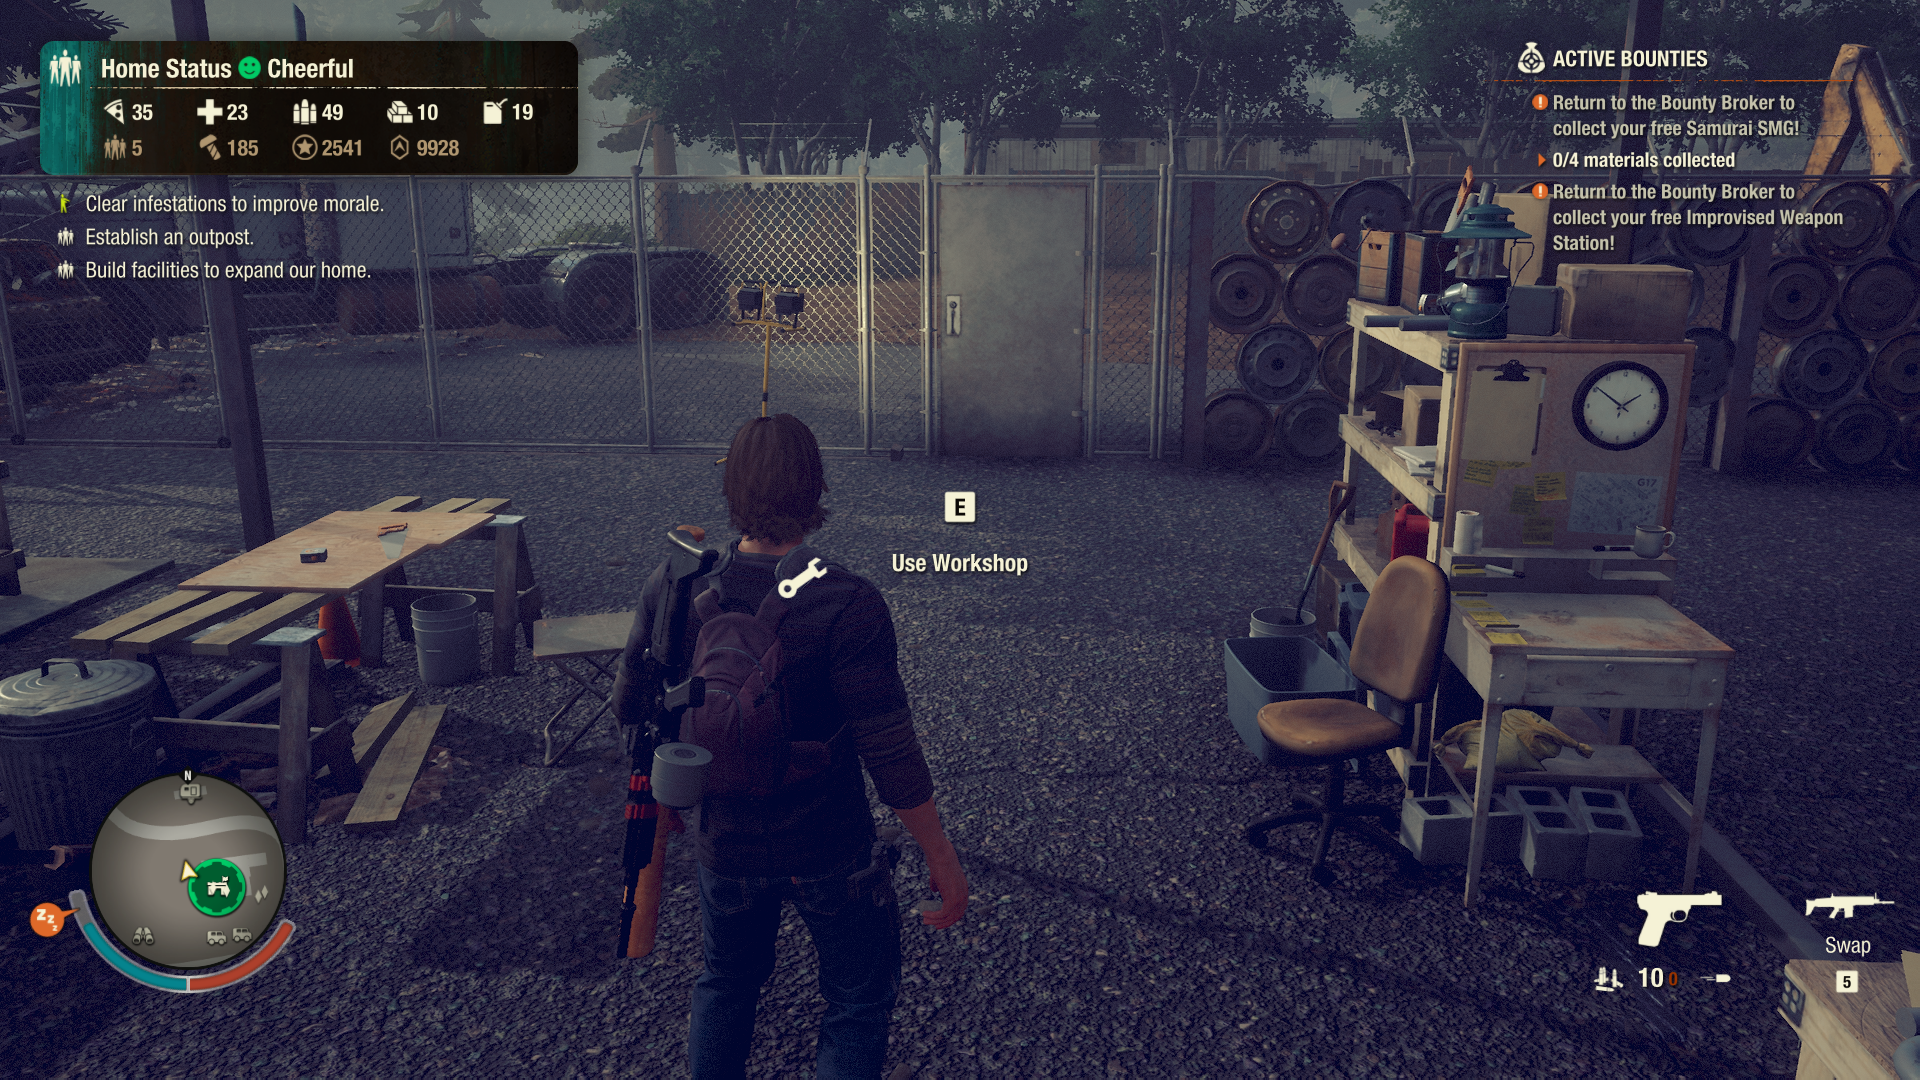 State of Decay: YOSE System Requirements - Can I Run It? - PCGameBenchmark